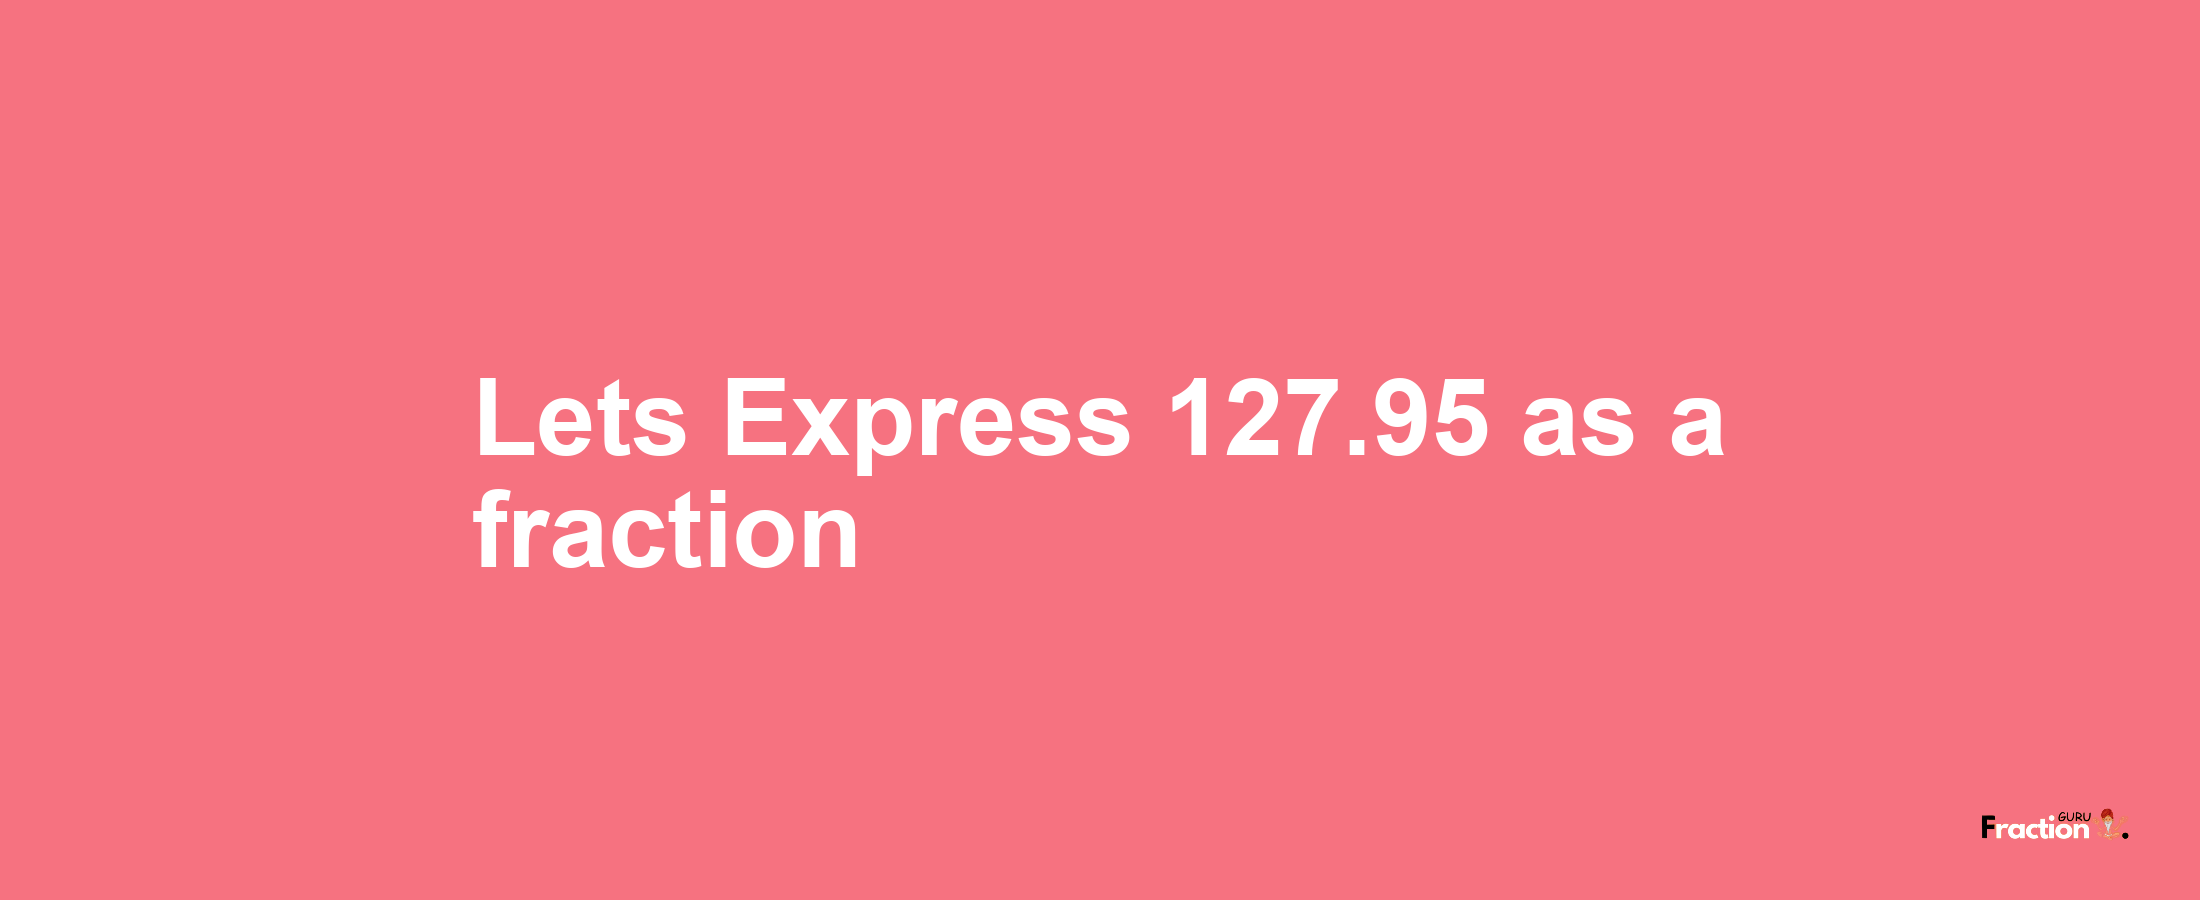 Lets Express 127.95 as afraction